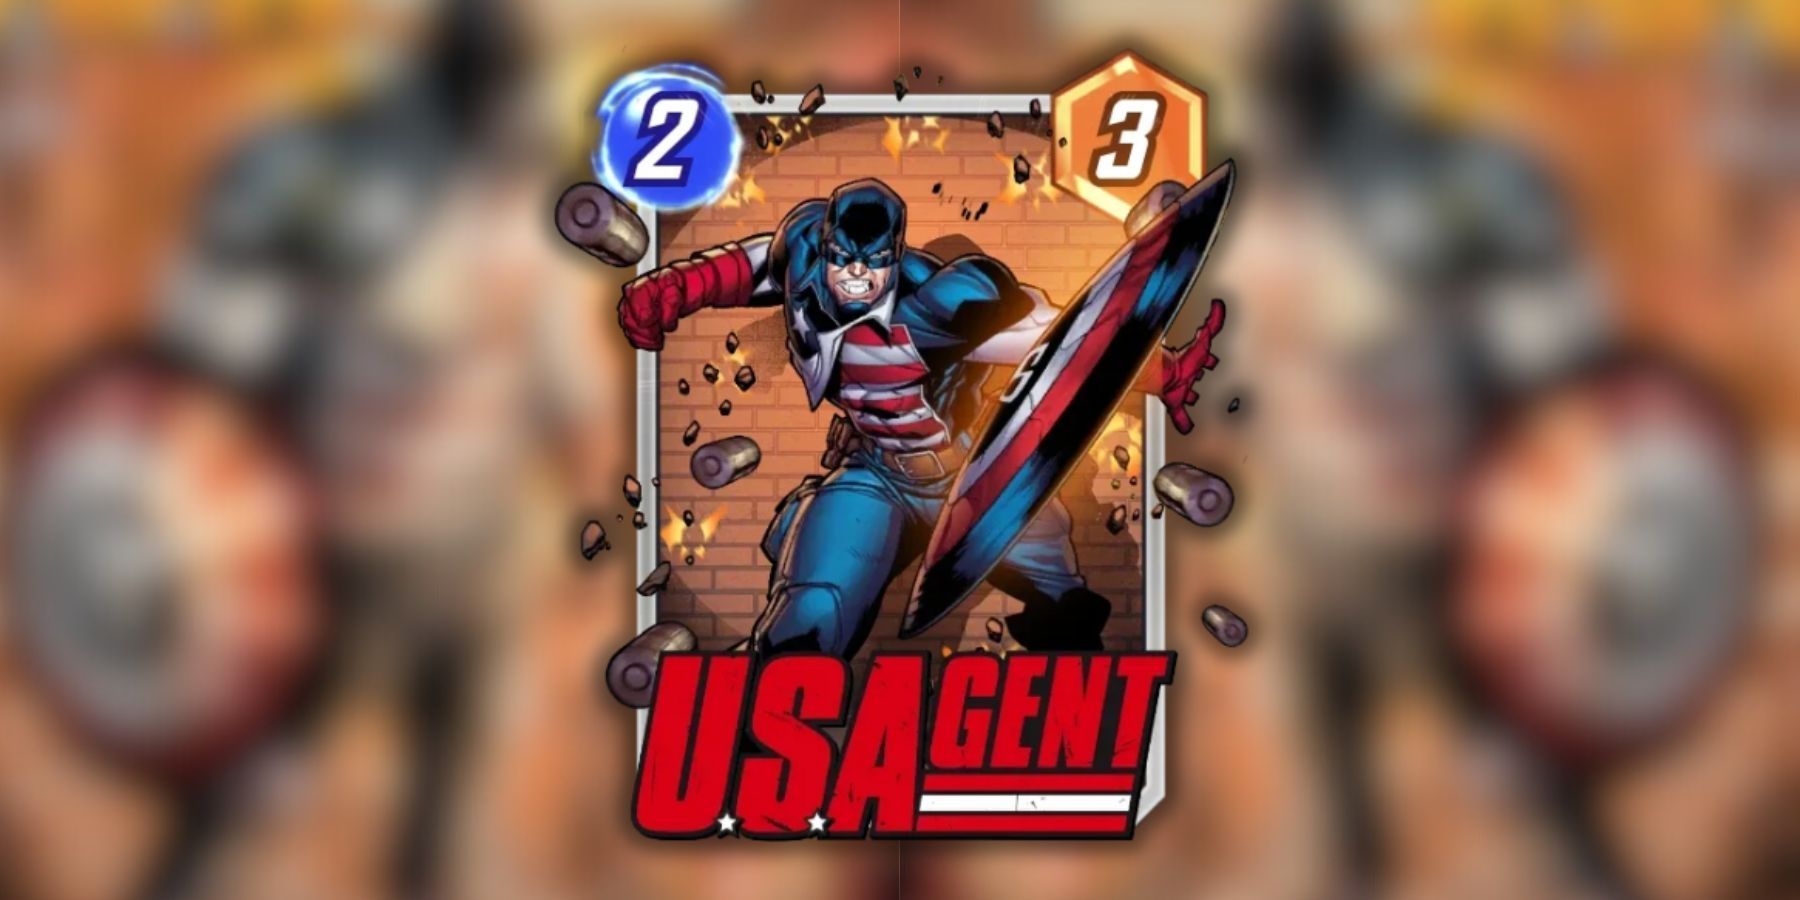 a us agent card variant in marvel snap.